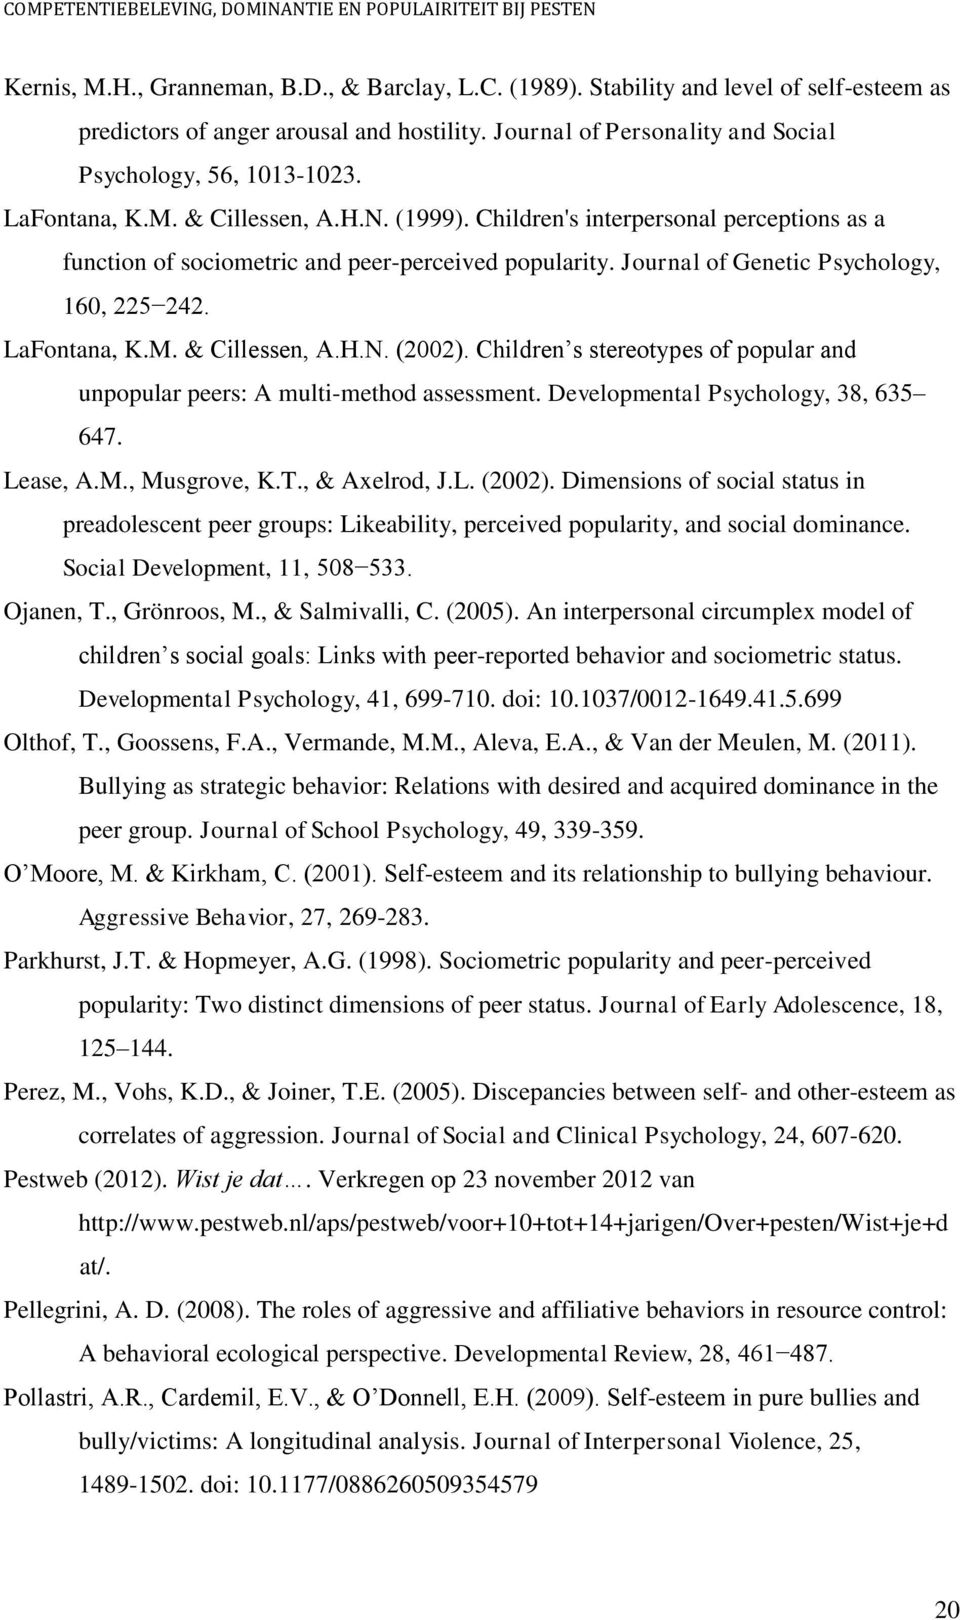 M. & Cillessen, A.H.N. (2002). Children s stereotypes of popular and unpopular peers: A multi-method assessment. Developmental Psychology, 38, 635 647. Lease, A.M., Musgrove, K.T., & Axelrod, J.L. (2002). Dimensions of social status in preadolescent peer groups: Likeability, perceived popularity, and social dominance.